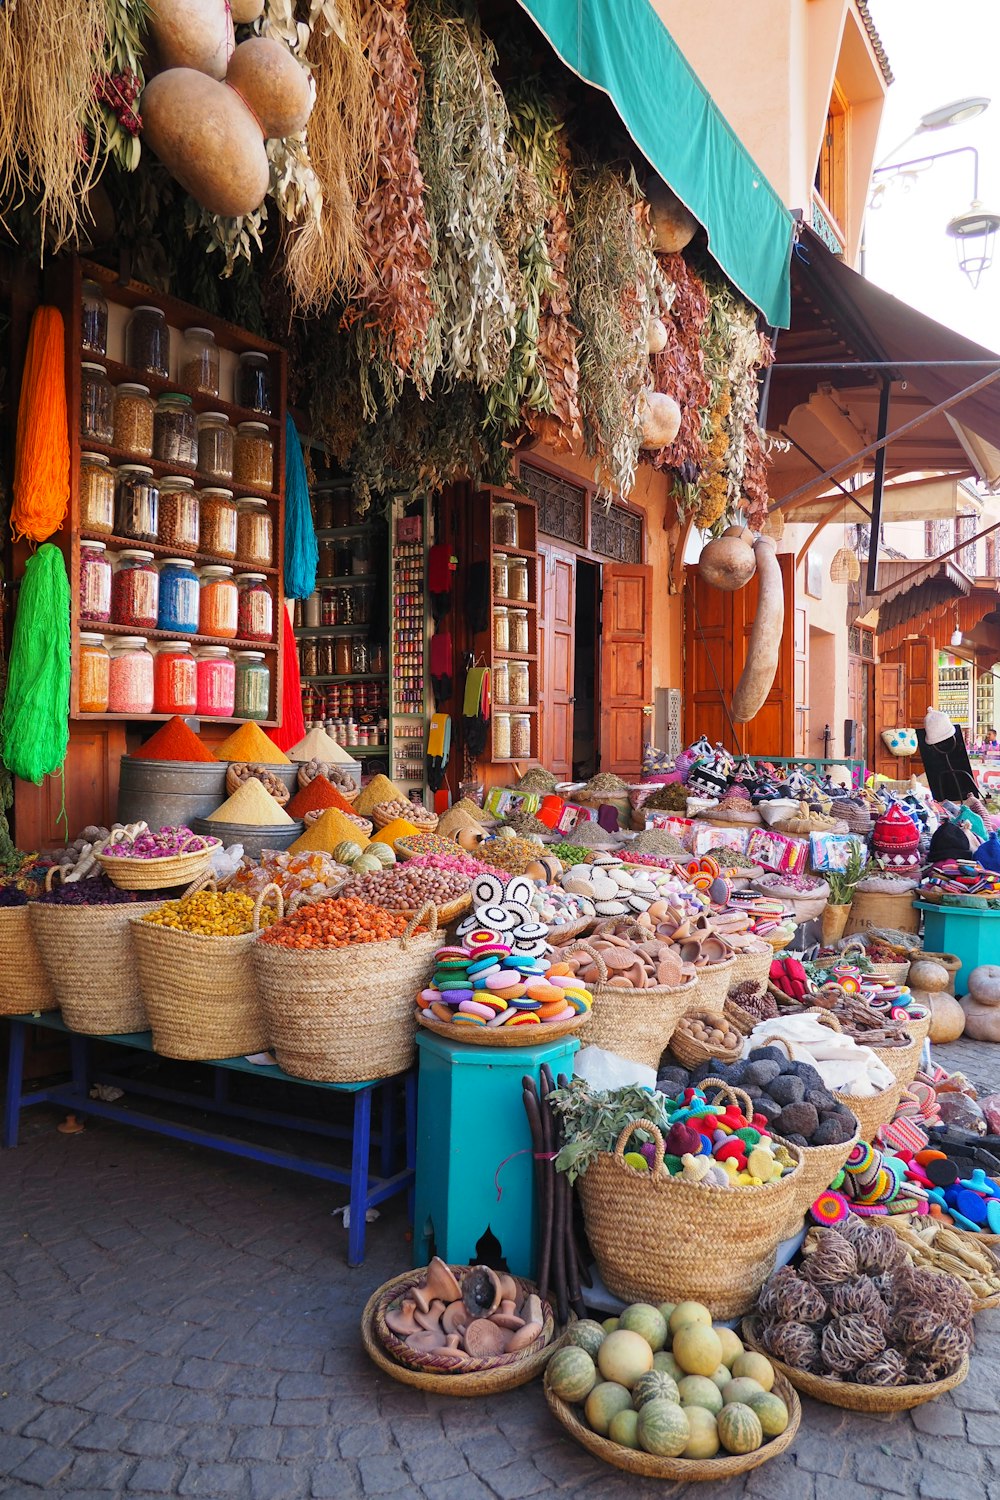 an outdoor market with baskets of food on display